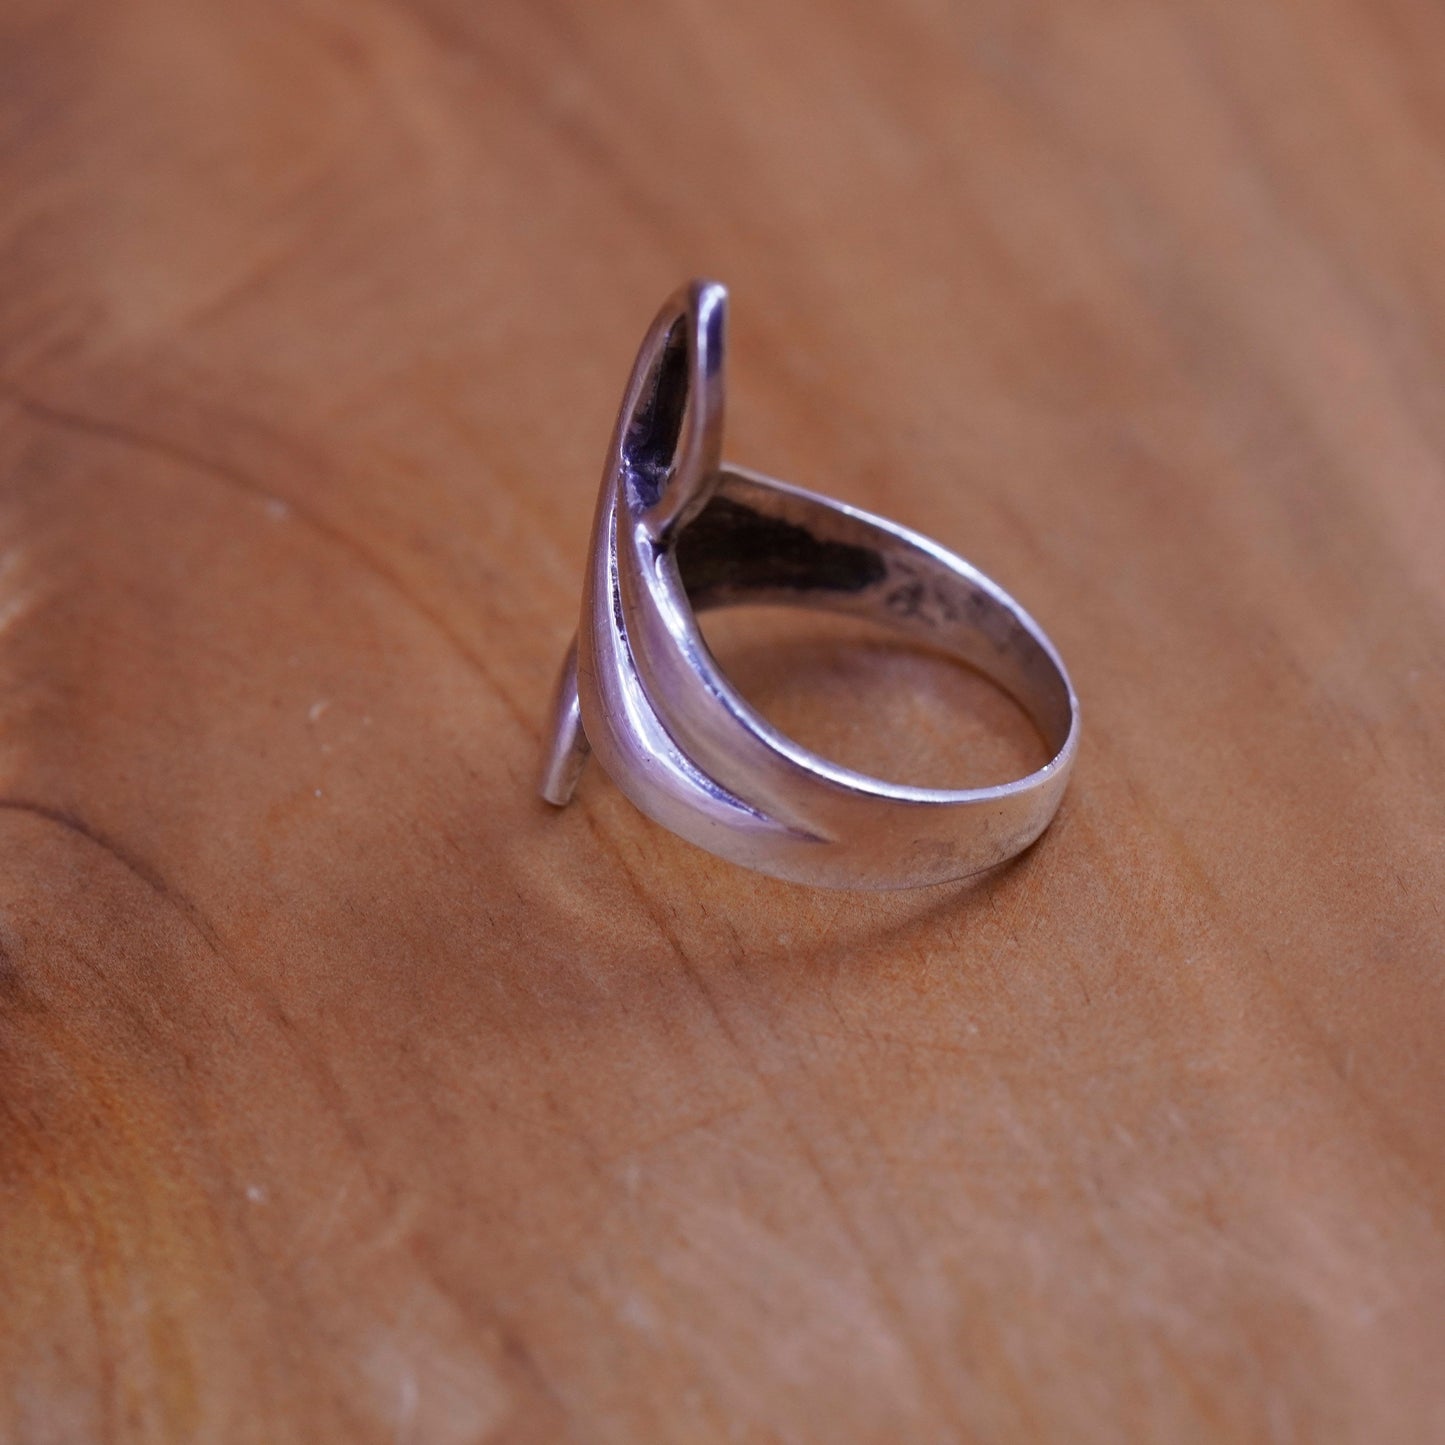 Size 6, vintage Sterling silver handmade ring, Modern 925 wavy band